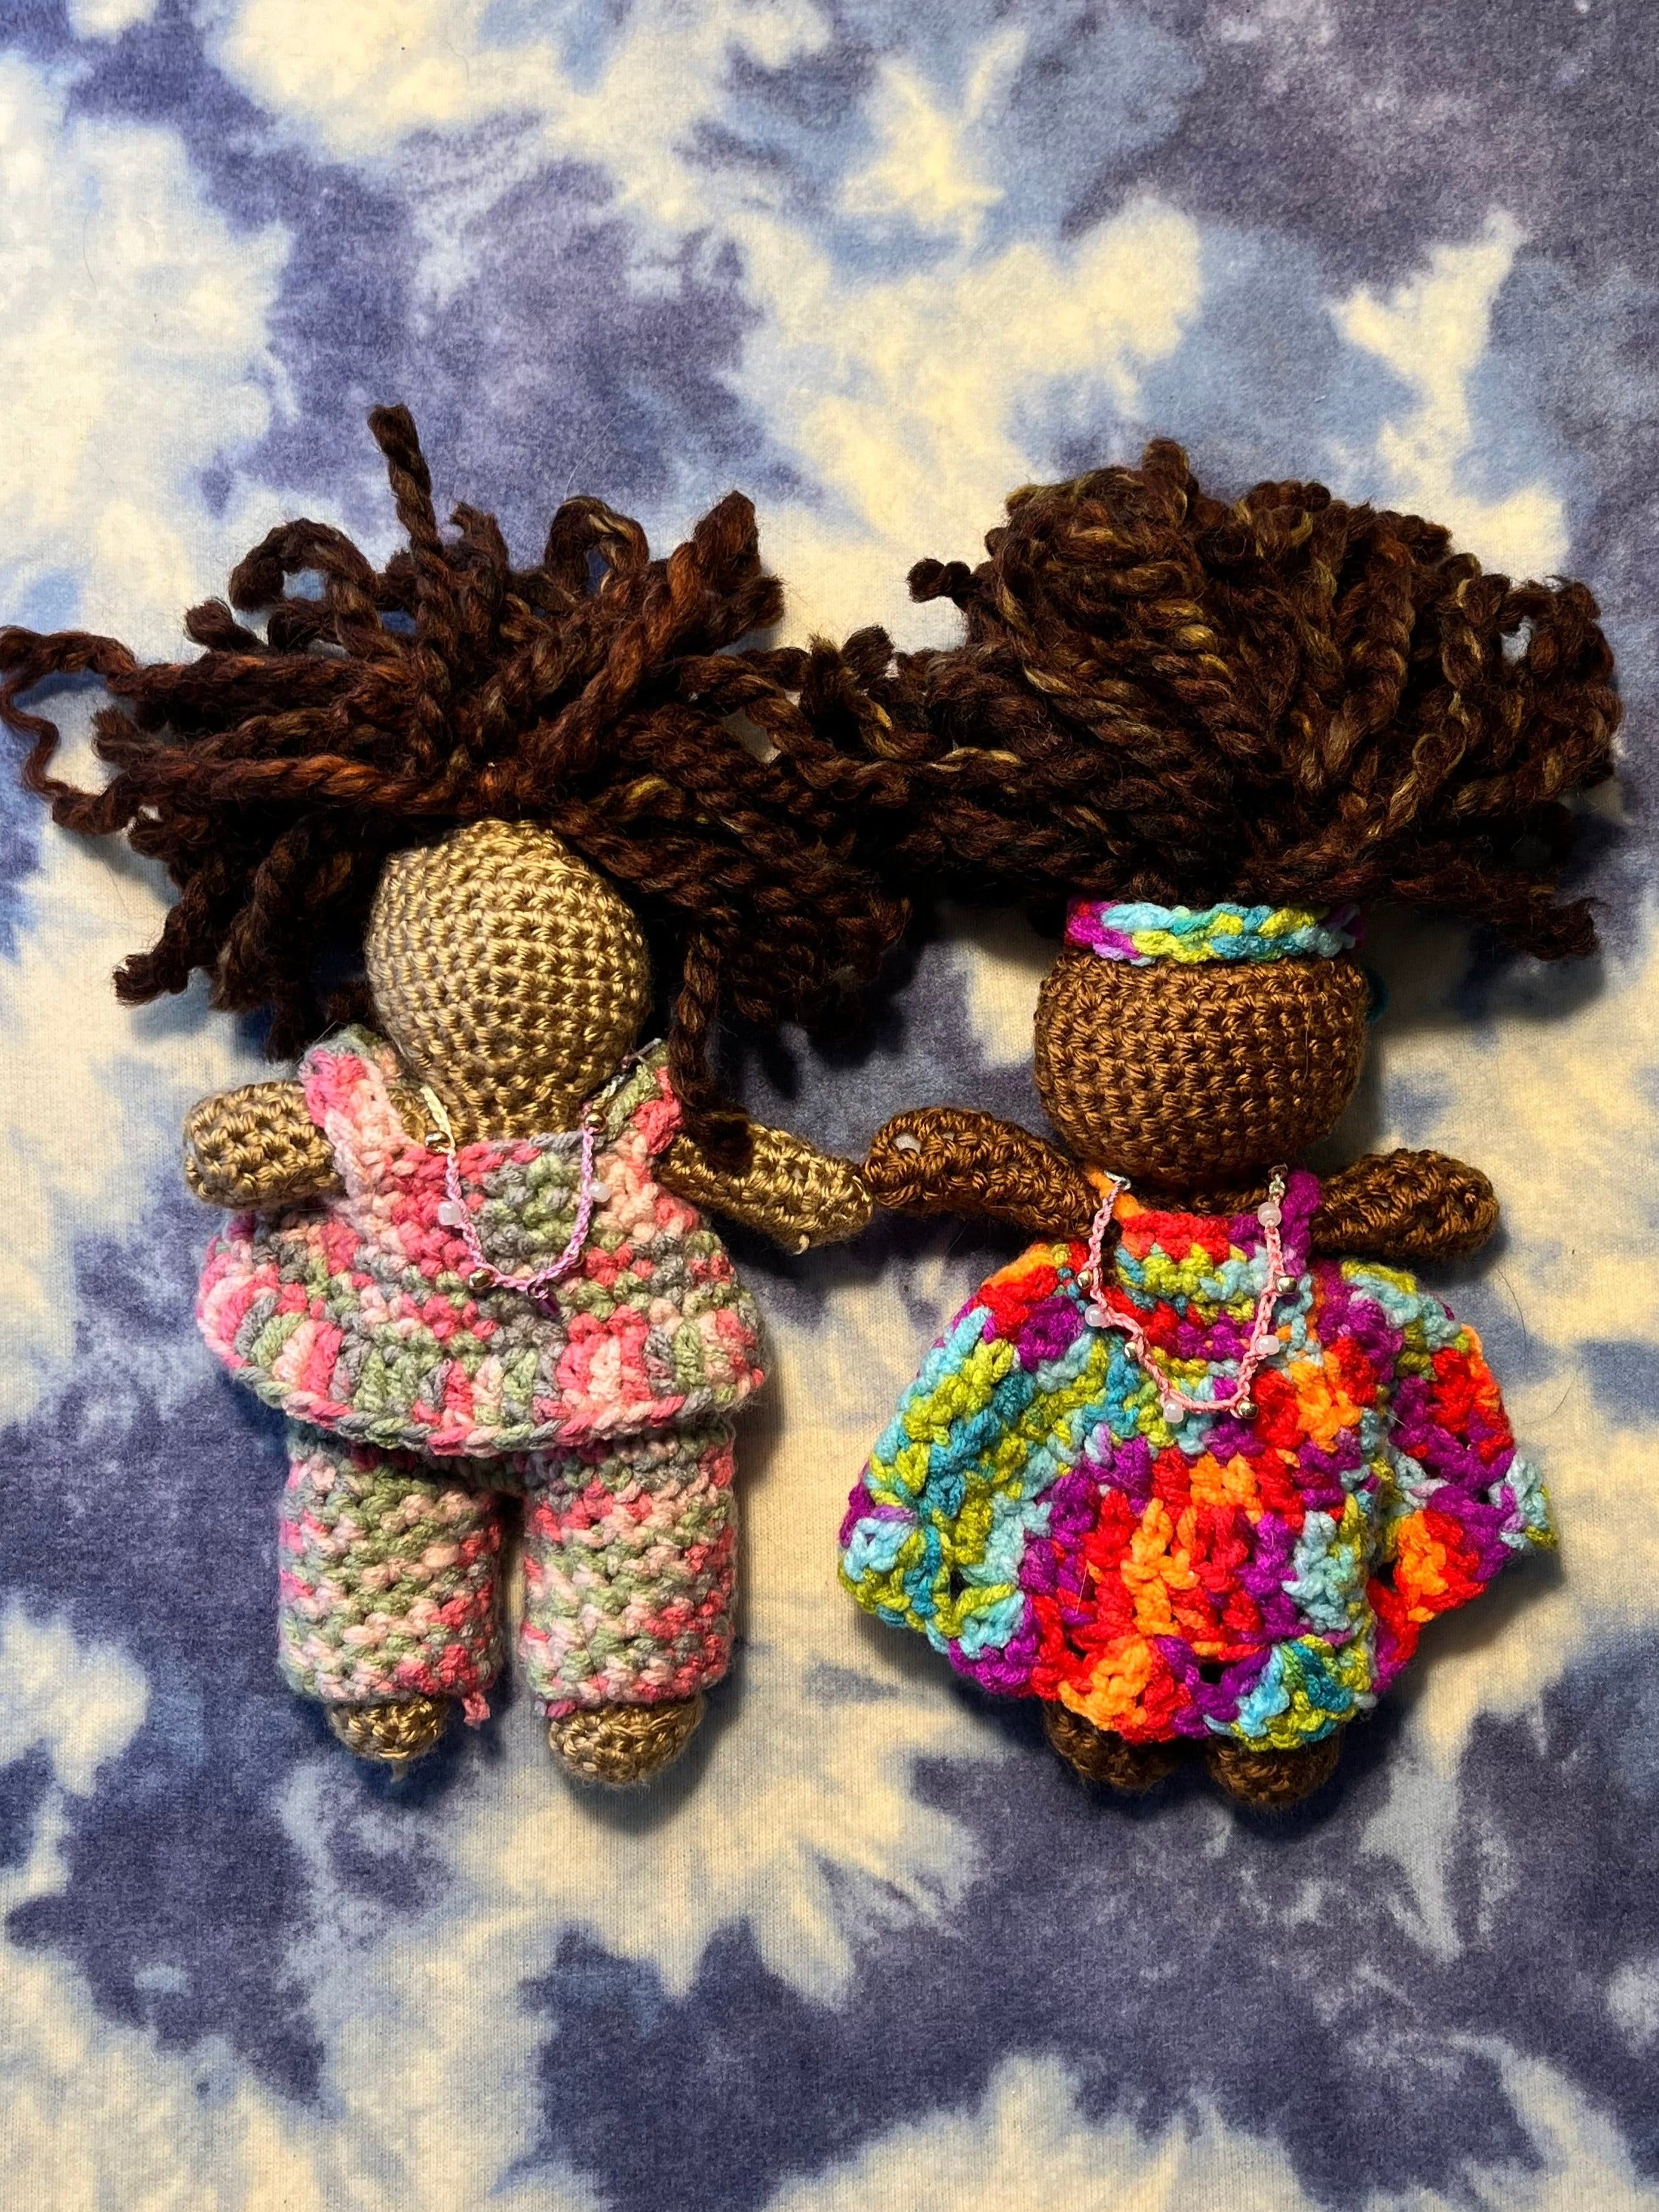 handmade crochet dolls with brown yarn hair. Doll on the left is tan skinned and is wearing a pink and green colored pant suit. Doll on the right is dark skinned and is wearing a orange, purple, green and blue multicolored dress with a matching headband. Both dolls have handbeaded necklaces. 